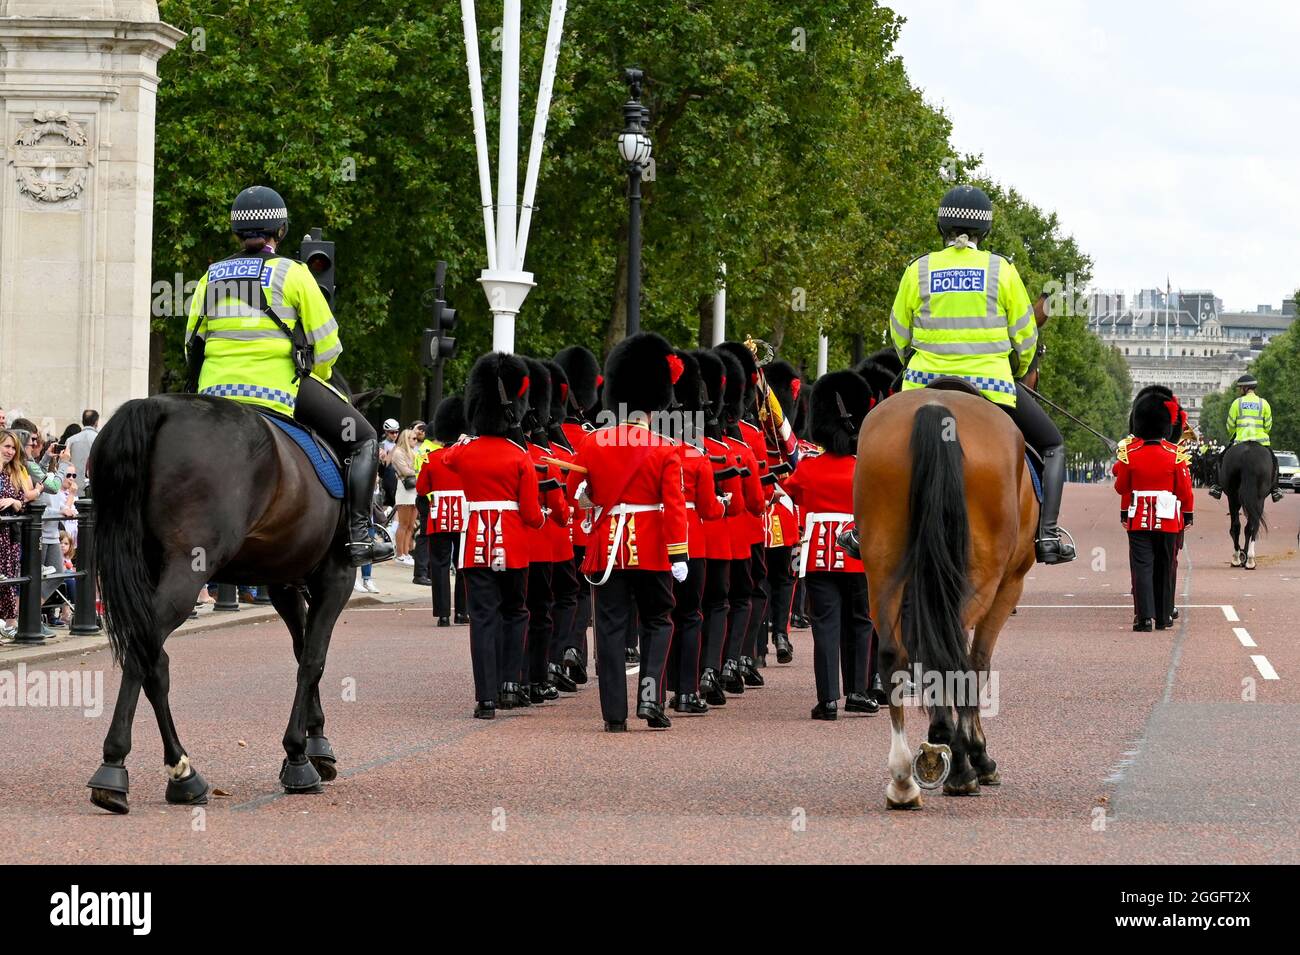 London, England - August 2021: Two police officers on horses escorting Guards in full uniform down The Mall Stock Photo